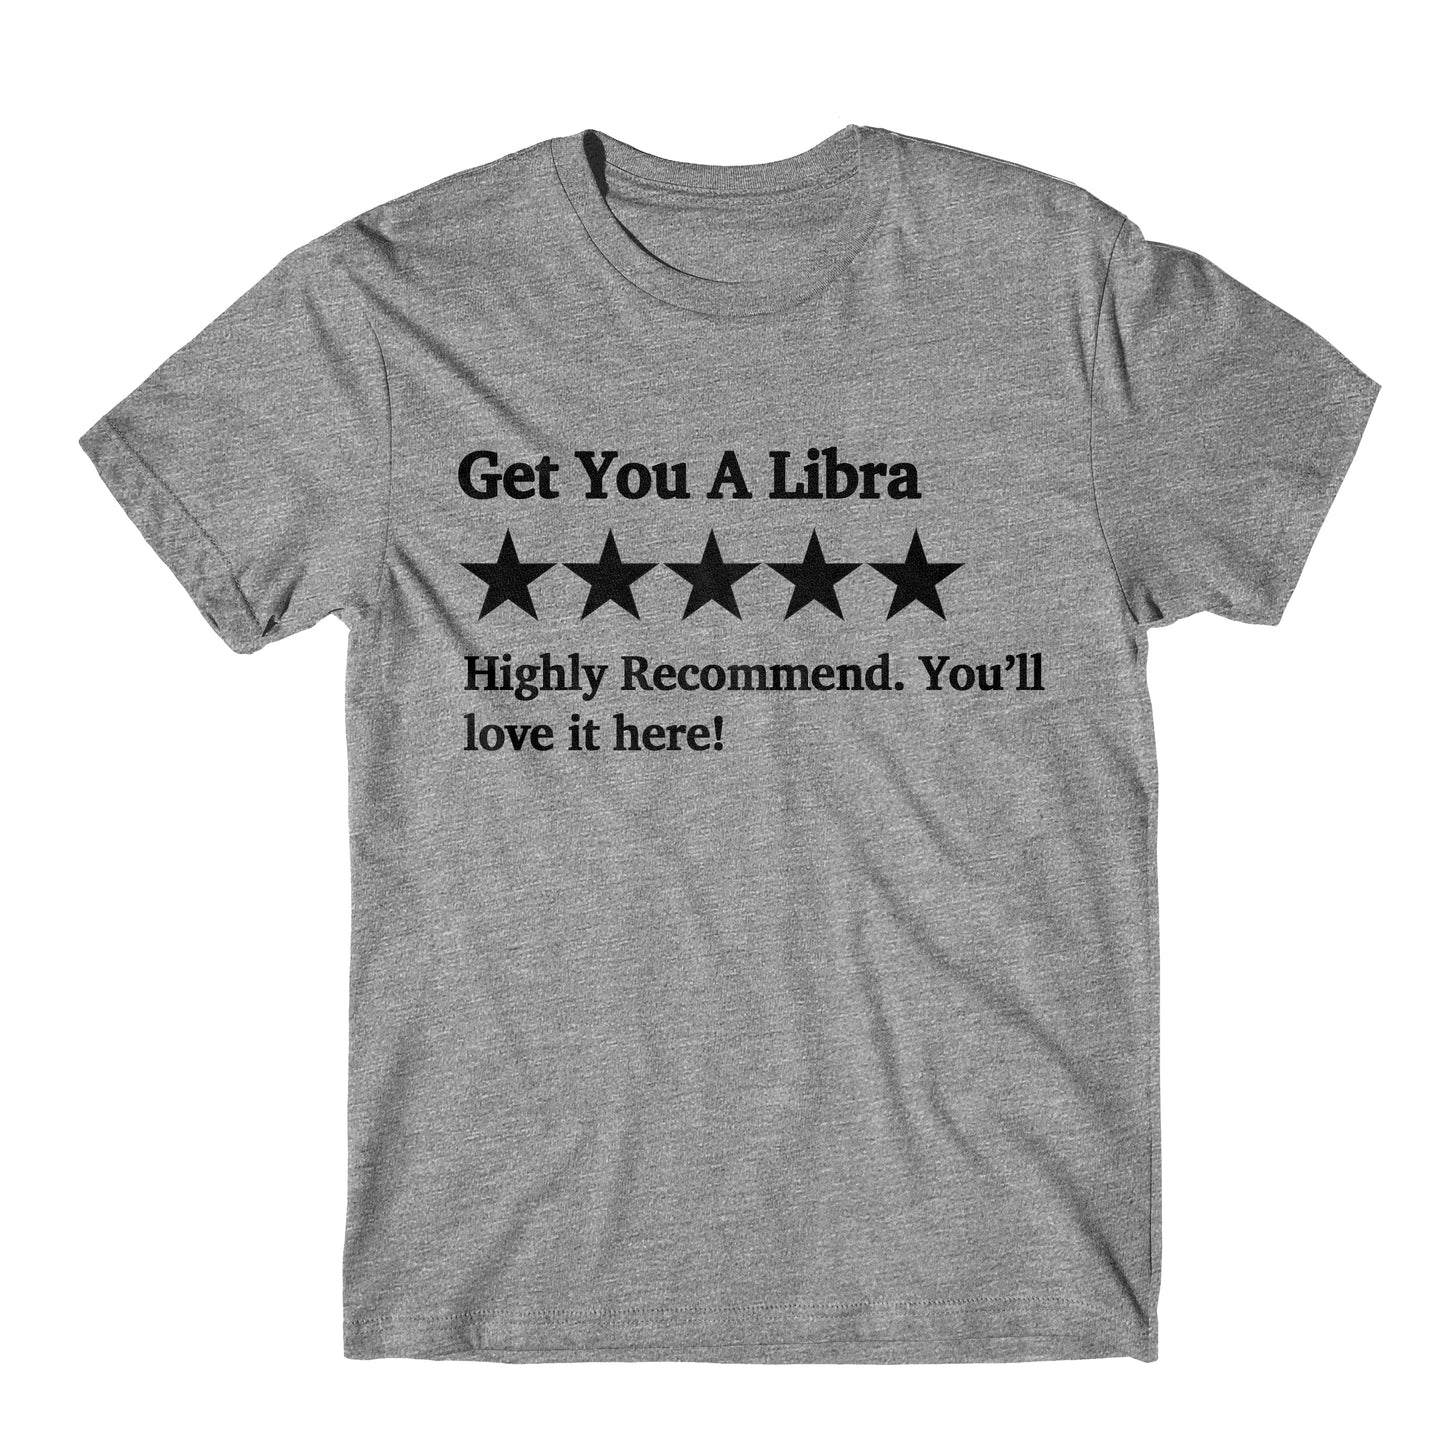 "Get You A Libra Five Star Rating" Tee